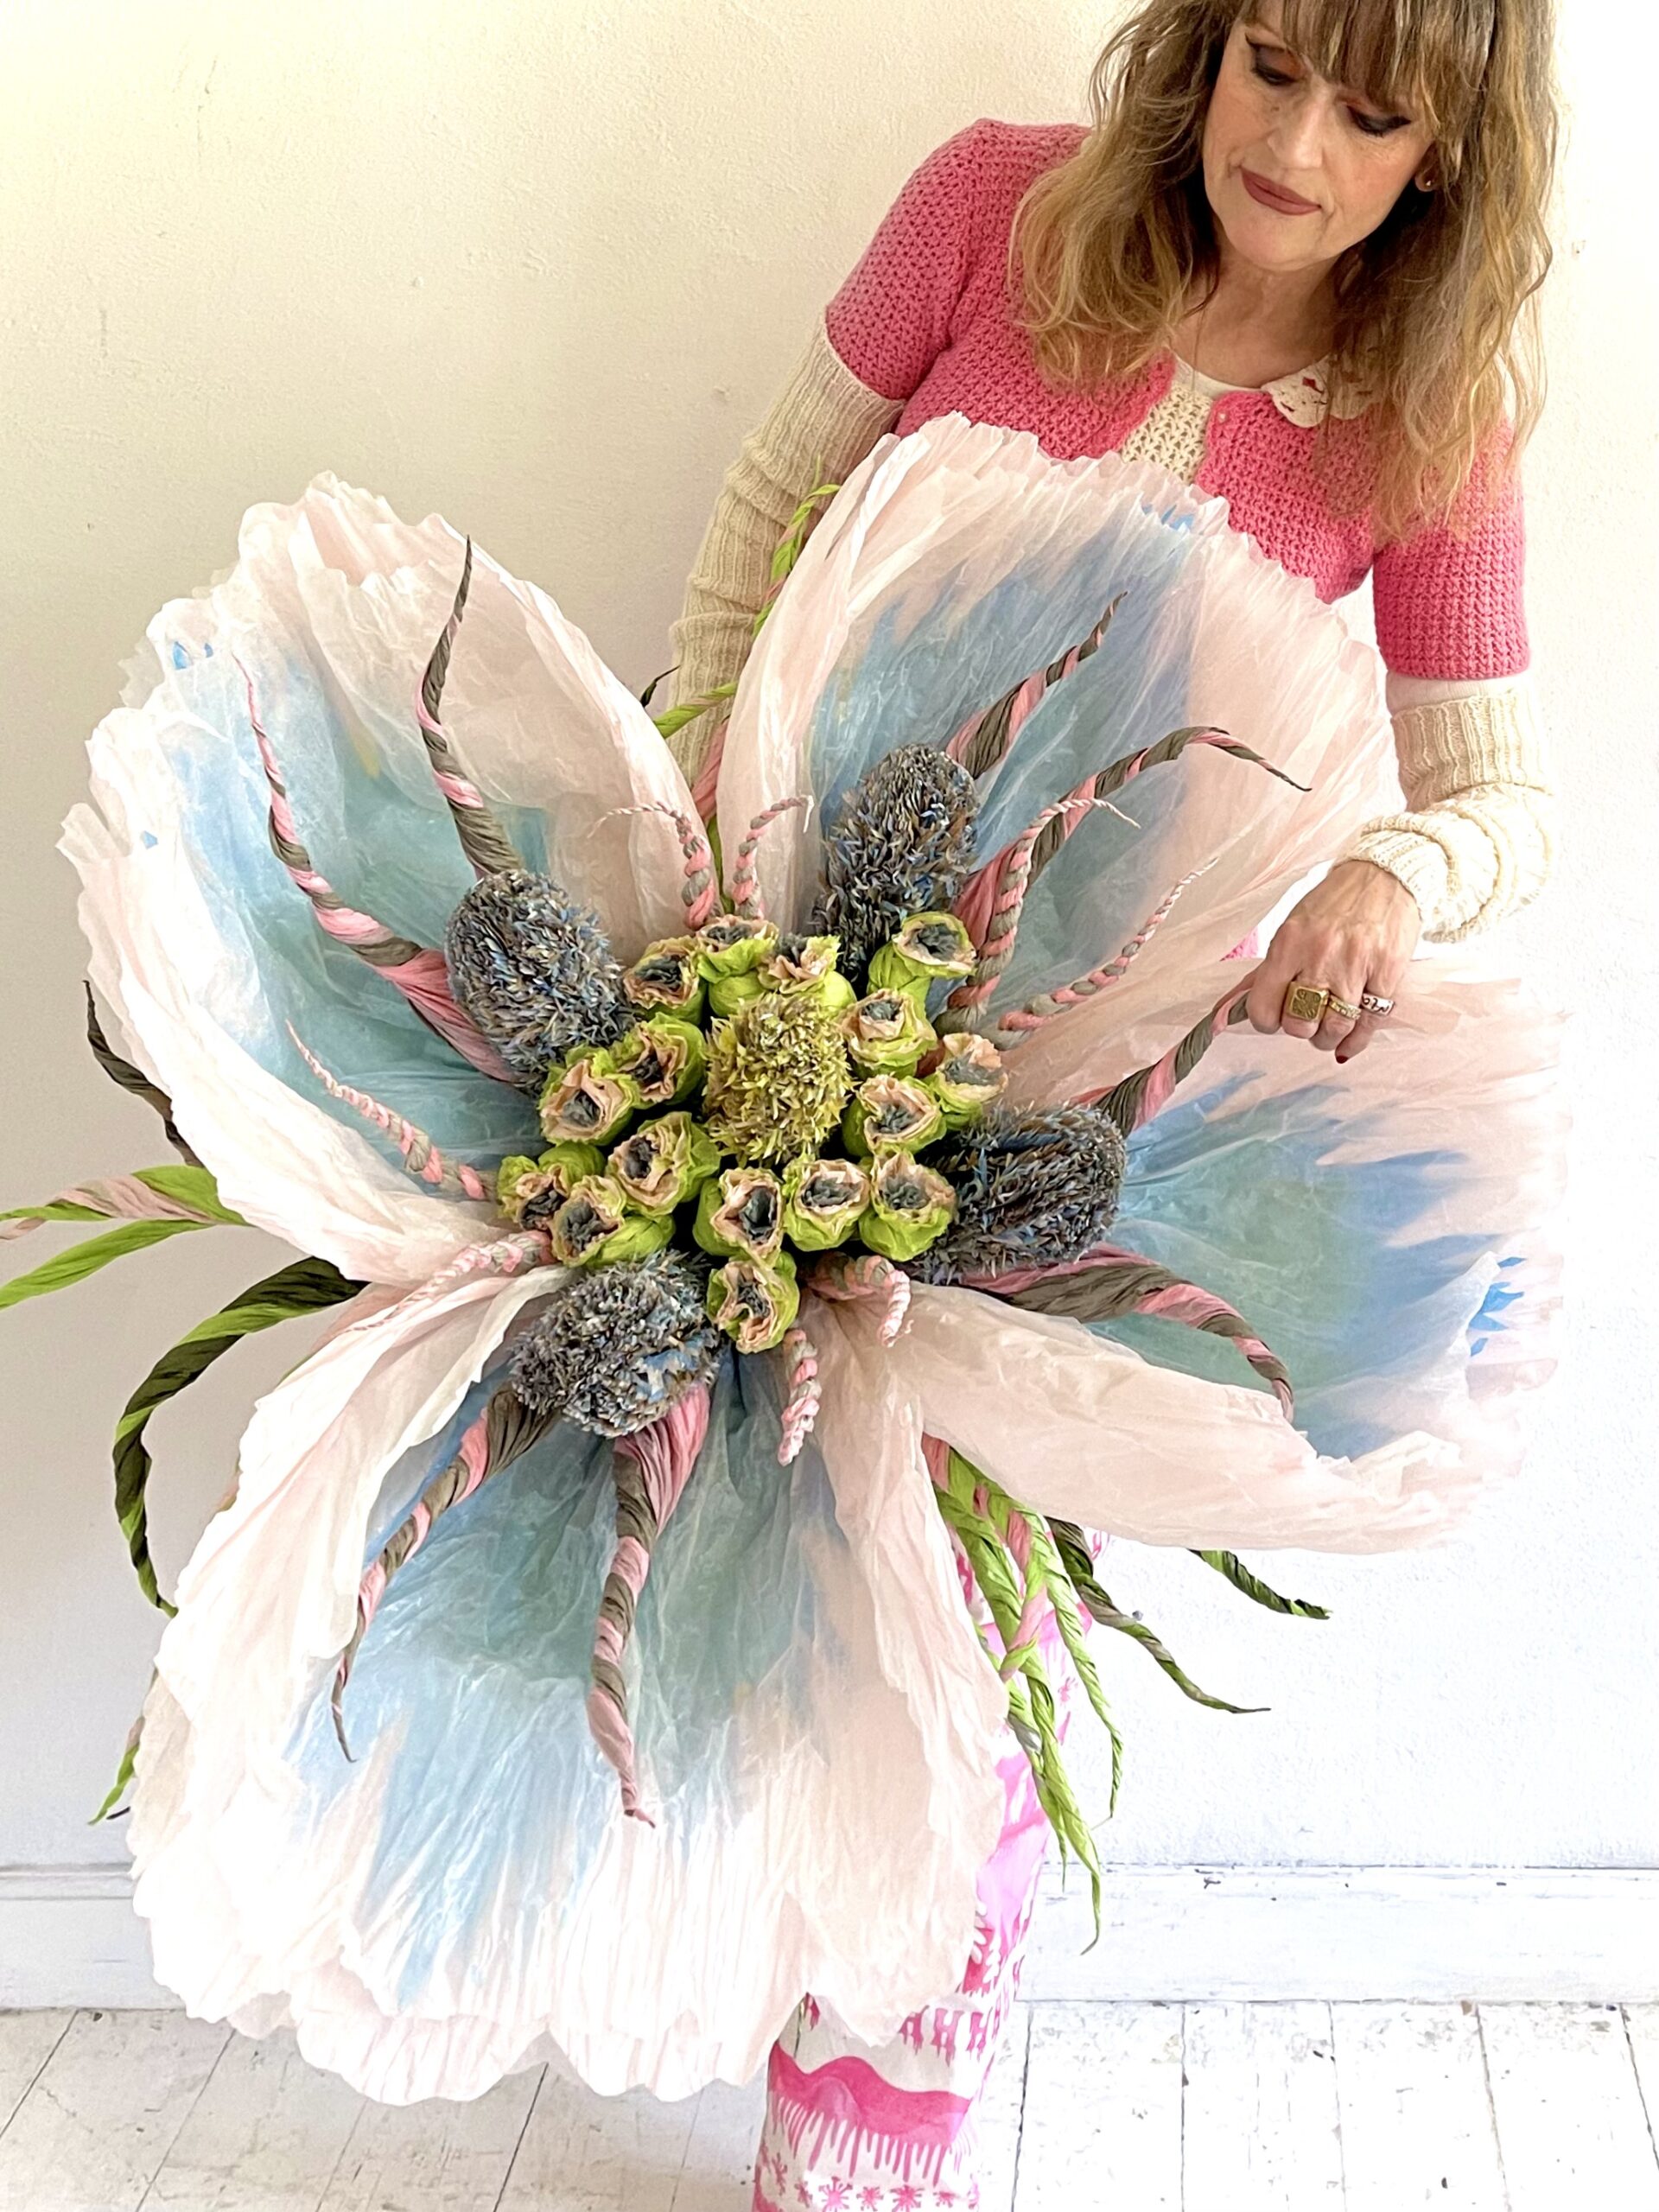 The artist is shown holding a large paper sculpture of a flower with green and pink interior and petals of blue and white.